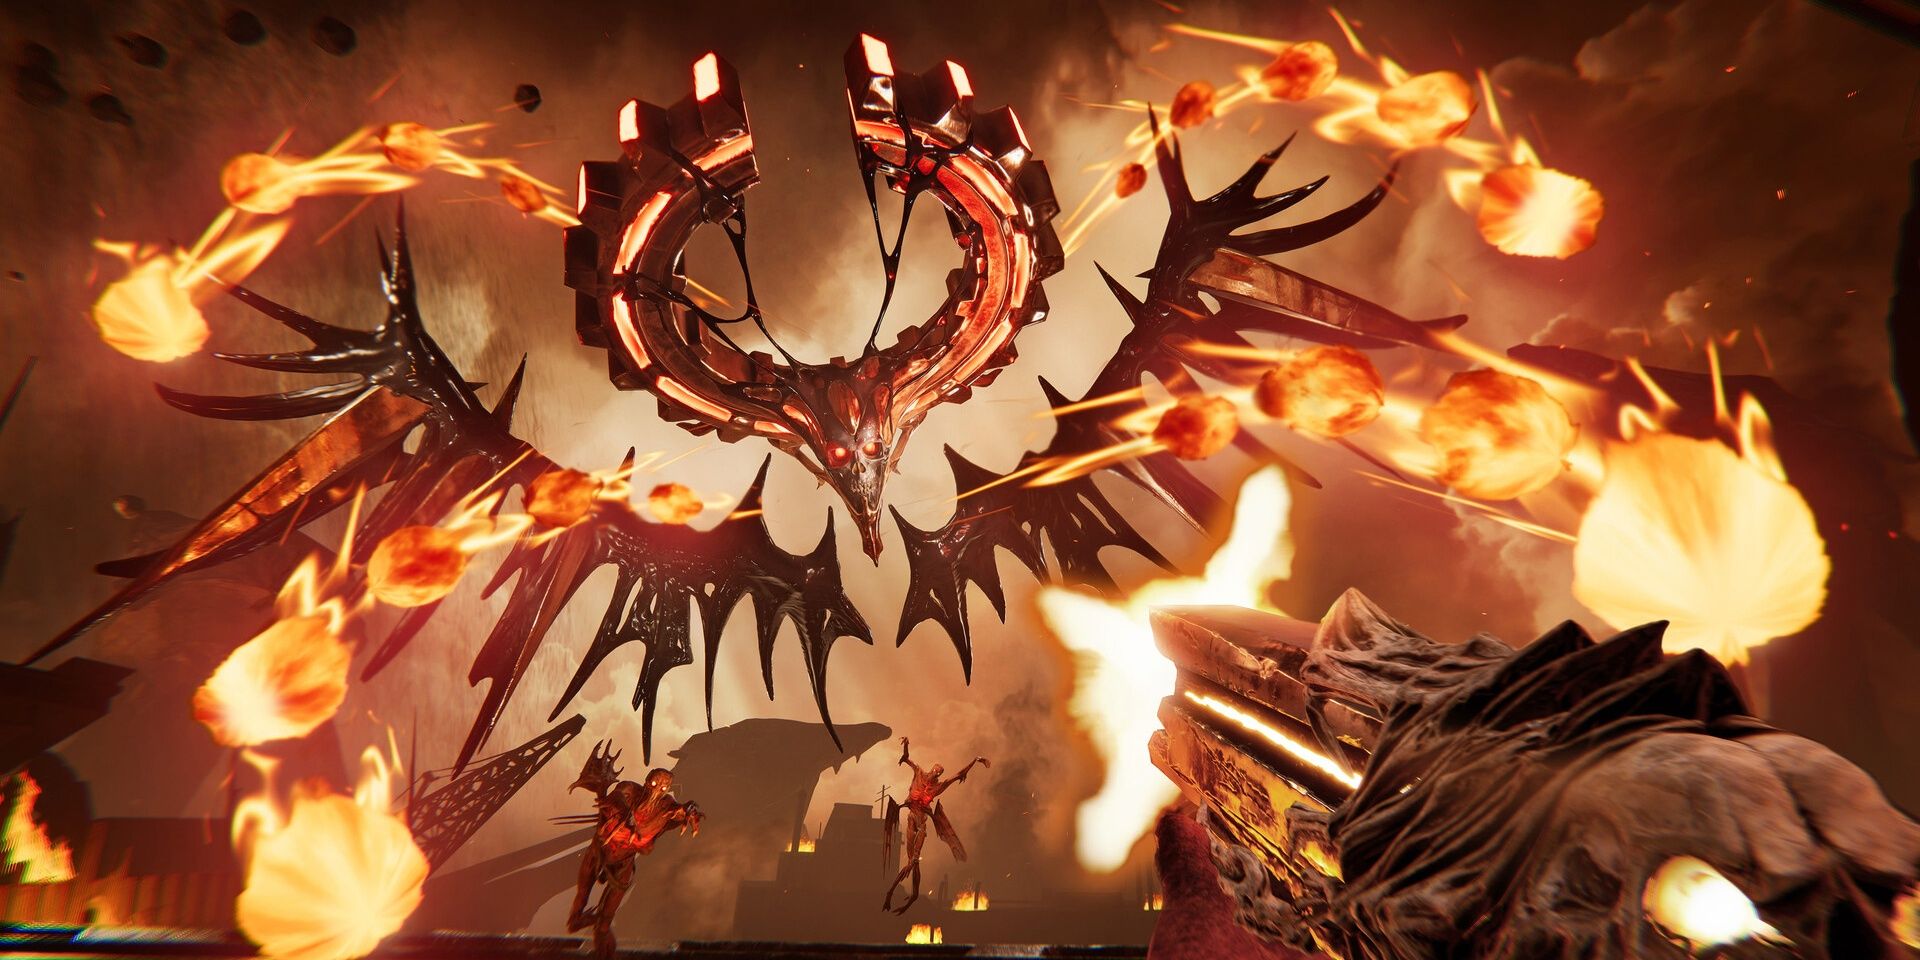 Shooting at a giant demon with large horns and wings in Metal: Hellsinger